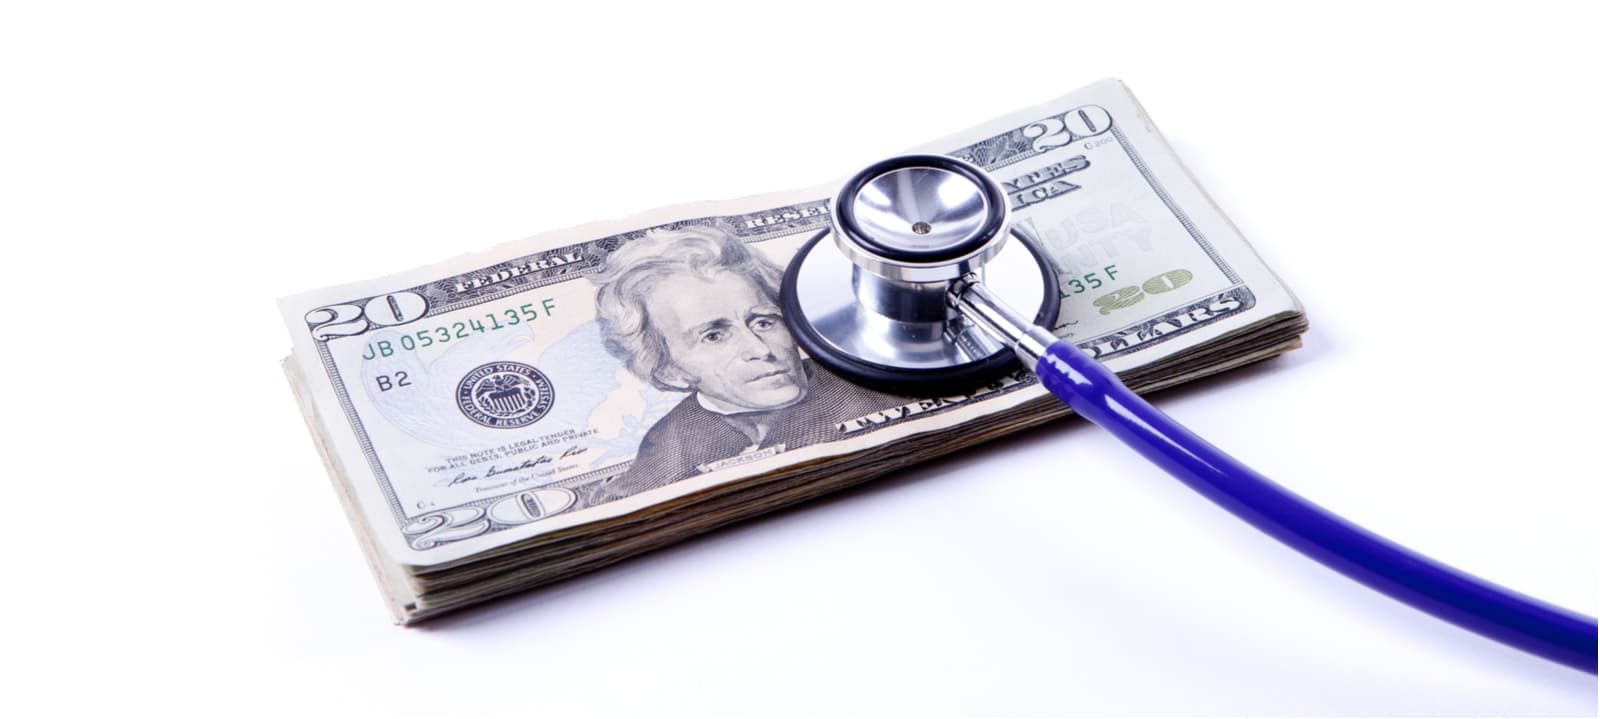 Image of a stethoscope on a $20 bill on PSA Financial's website